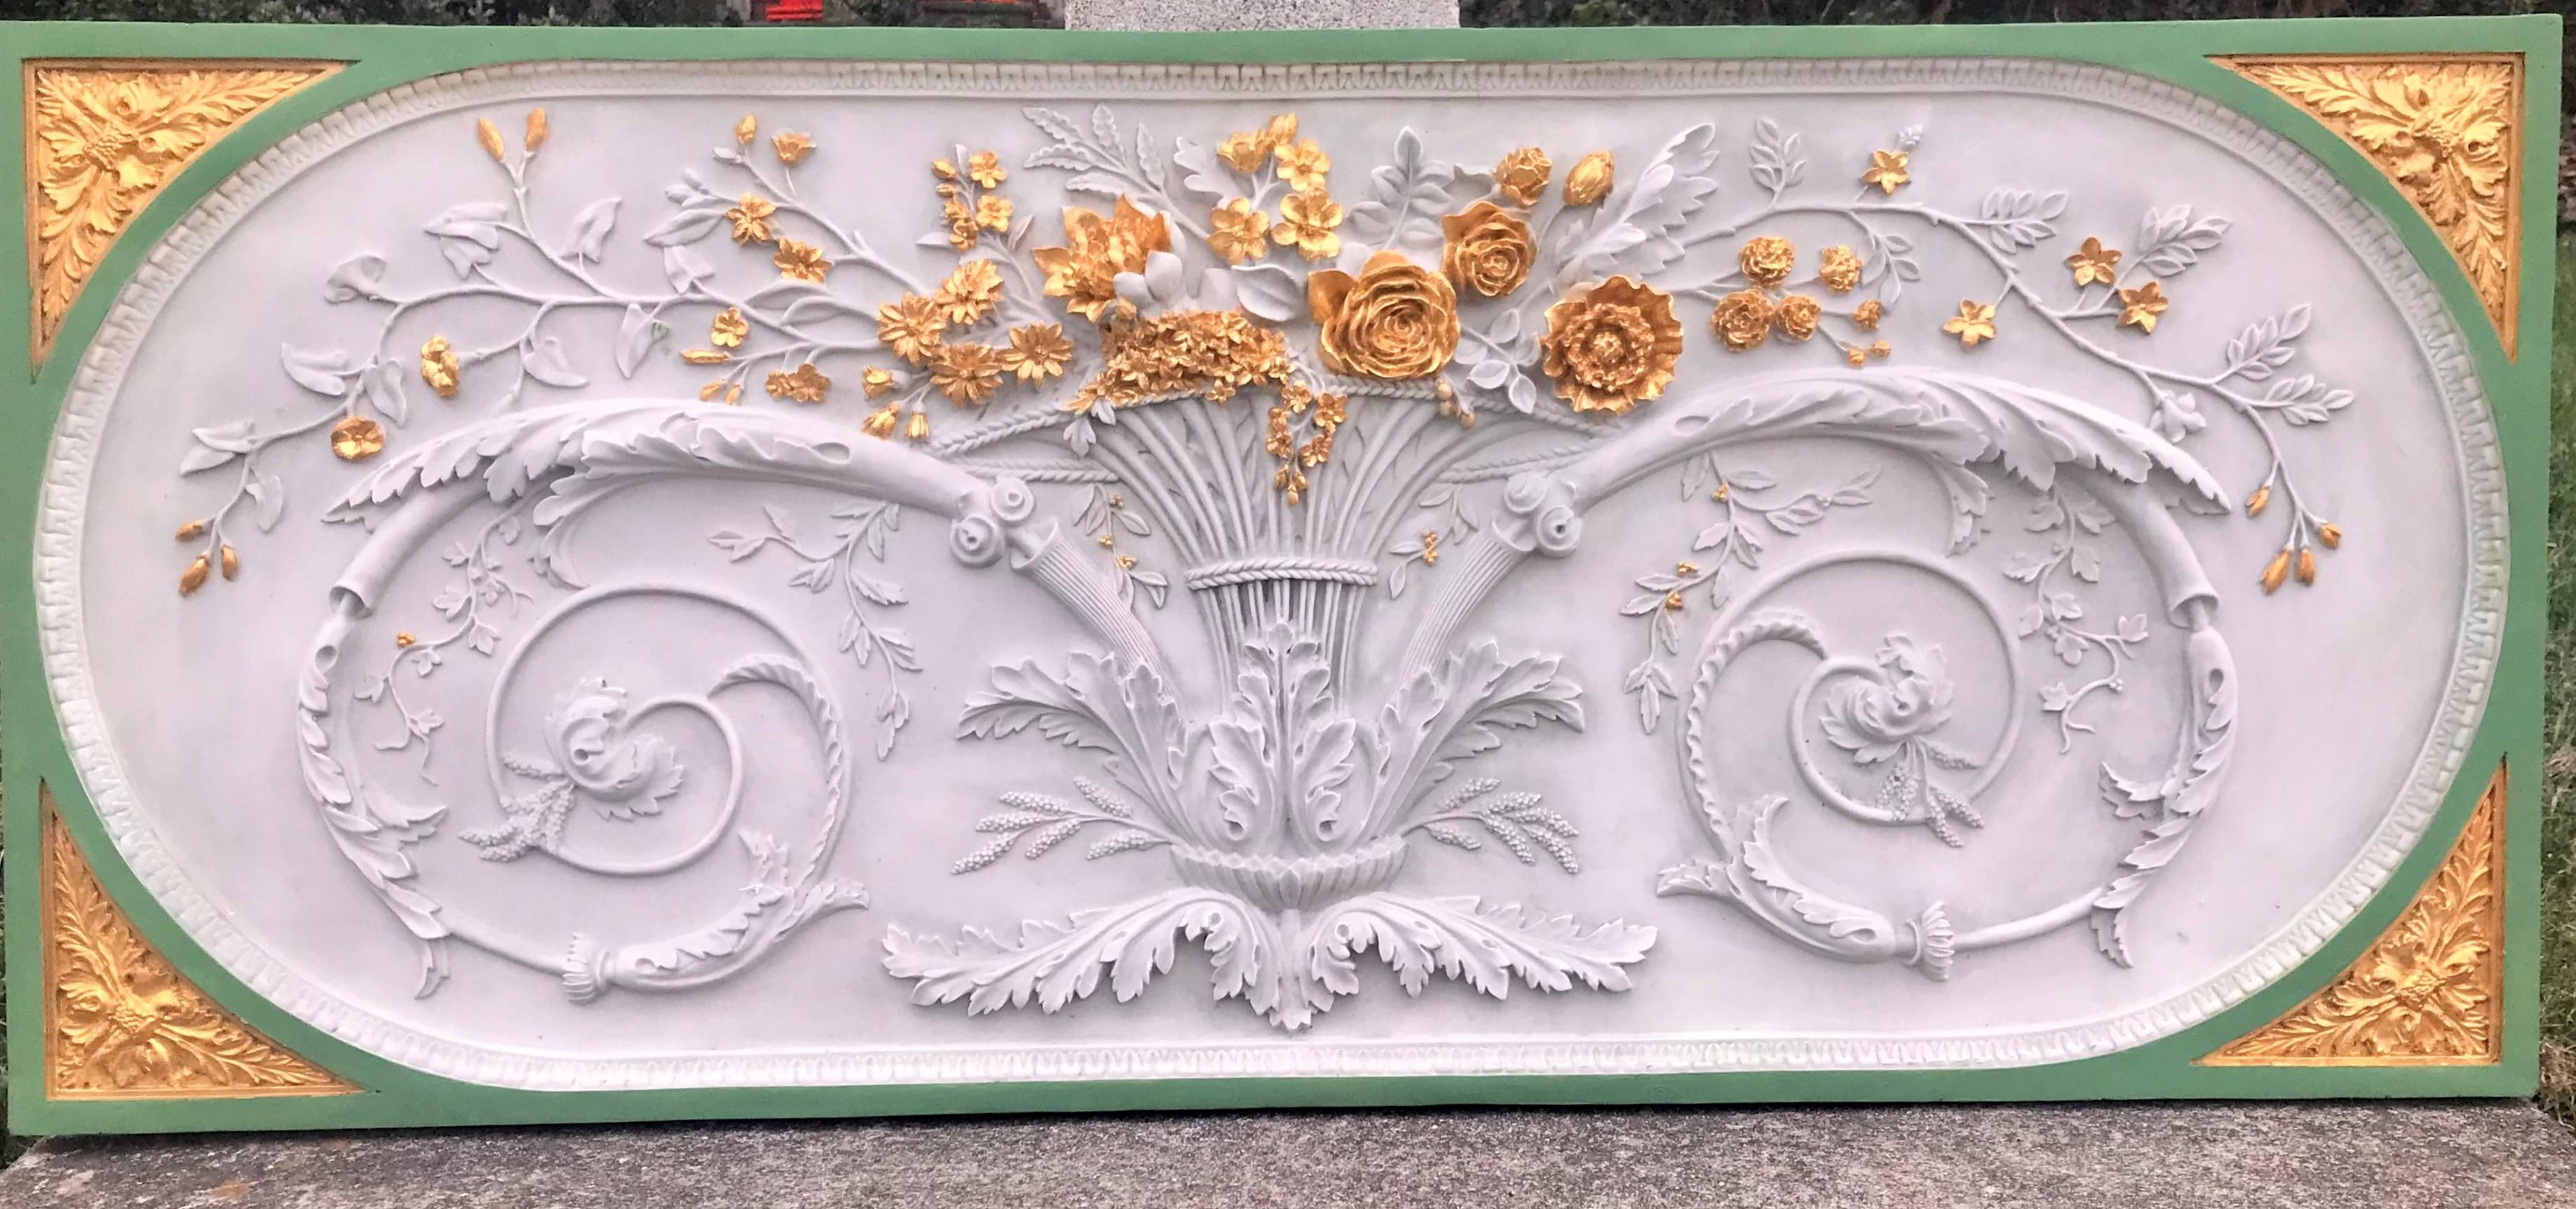 A grand floral design with neoclassical design elements on panel . The flowers gilded in gold leaf the overall border in French Green (possibly later added ). Of an unknown composite material with an up-close look of marble or polished plaster.